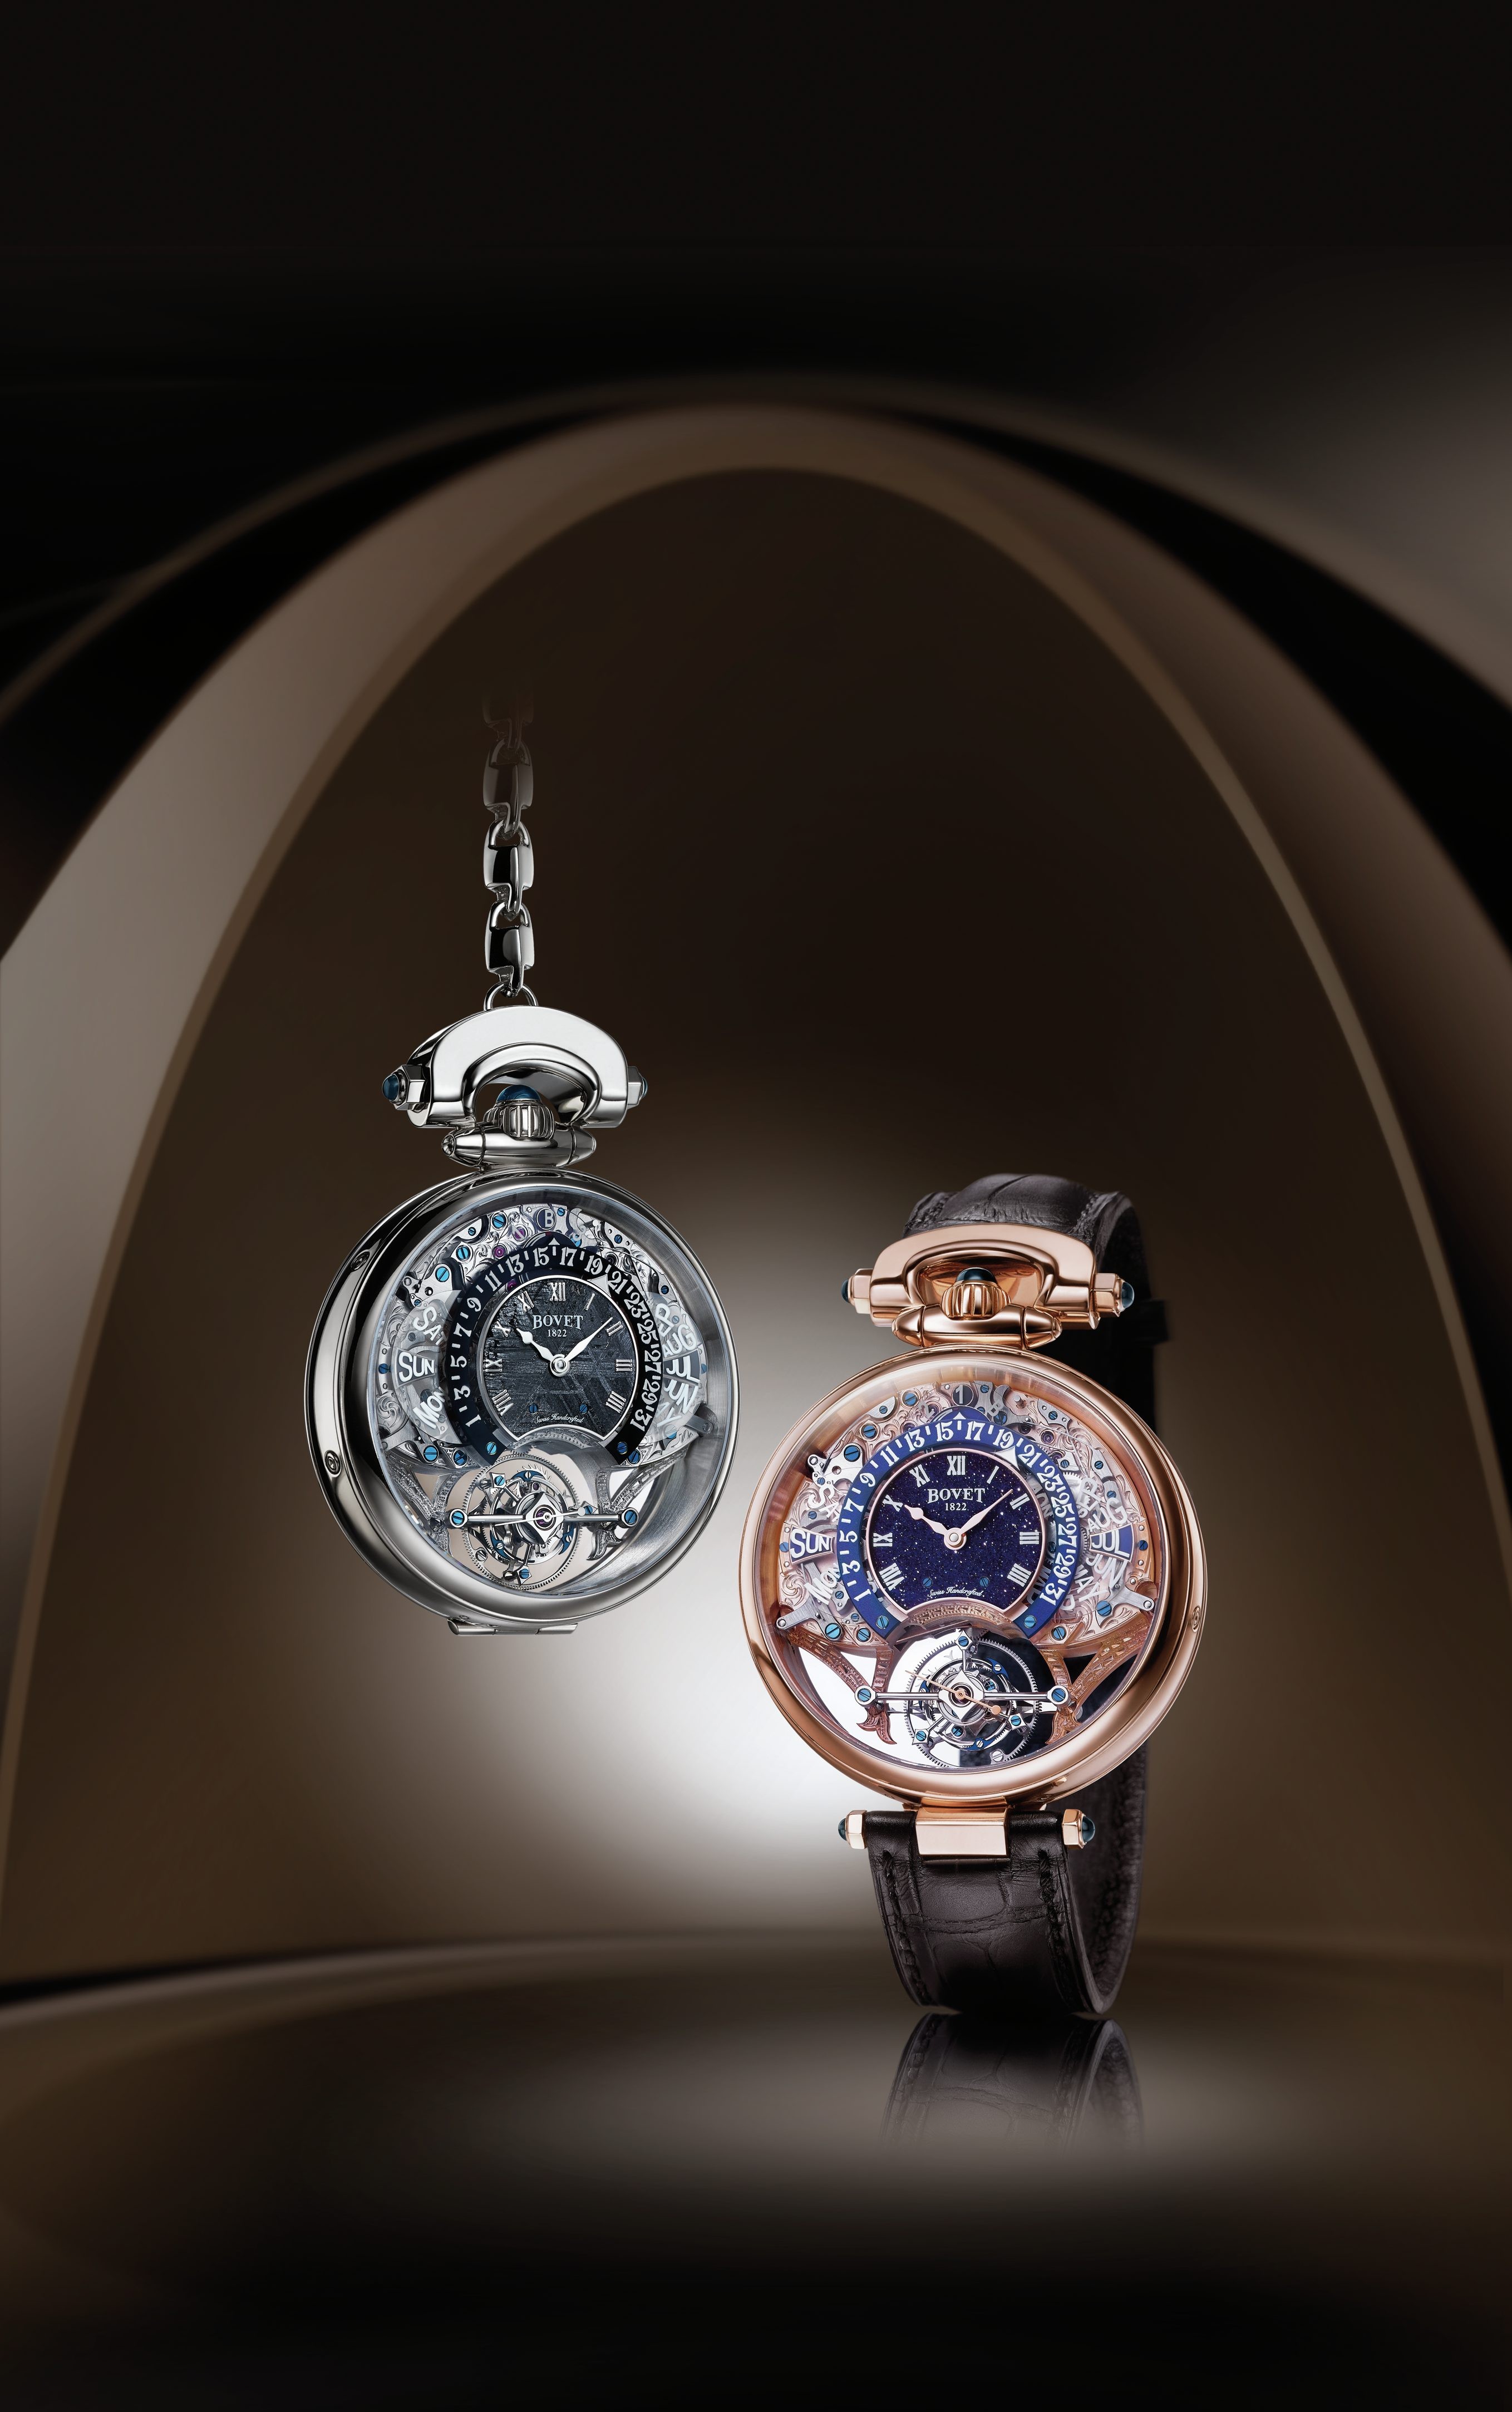 Bovet’s new watches contain bits of meteorites or aventurine.